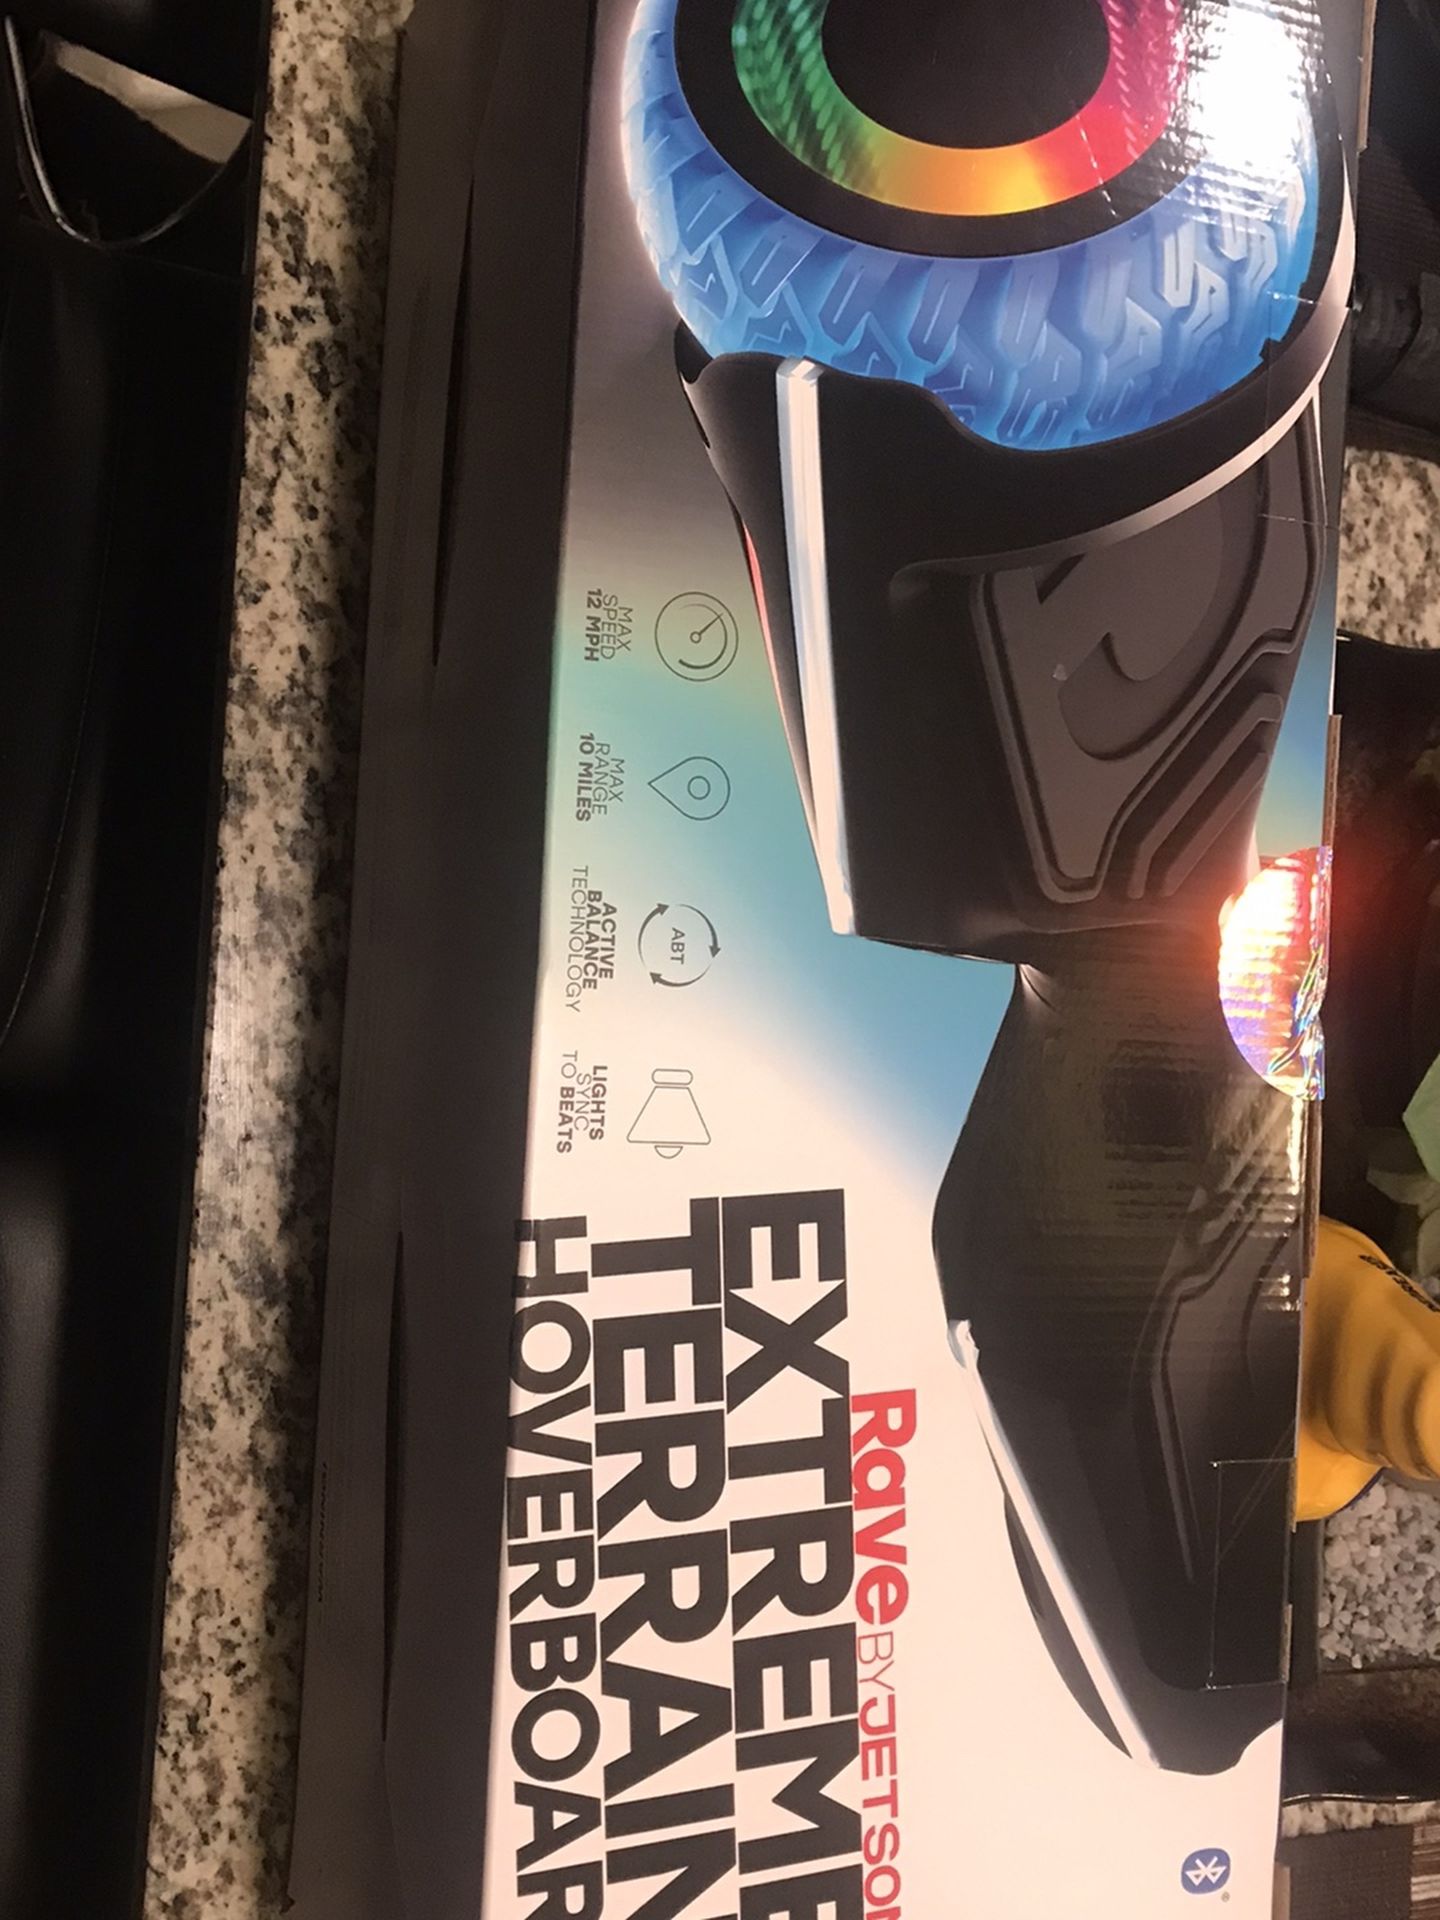 New JETSON RAVE EXTREME HOVERBOARD